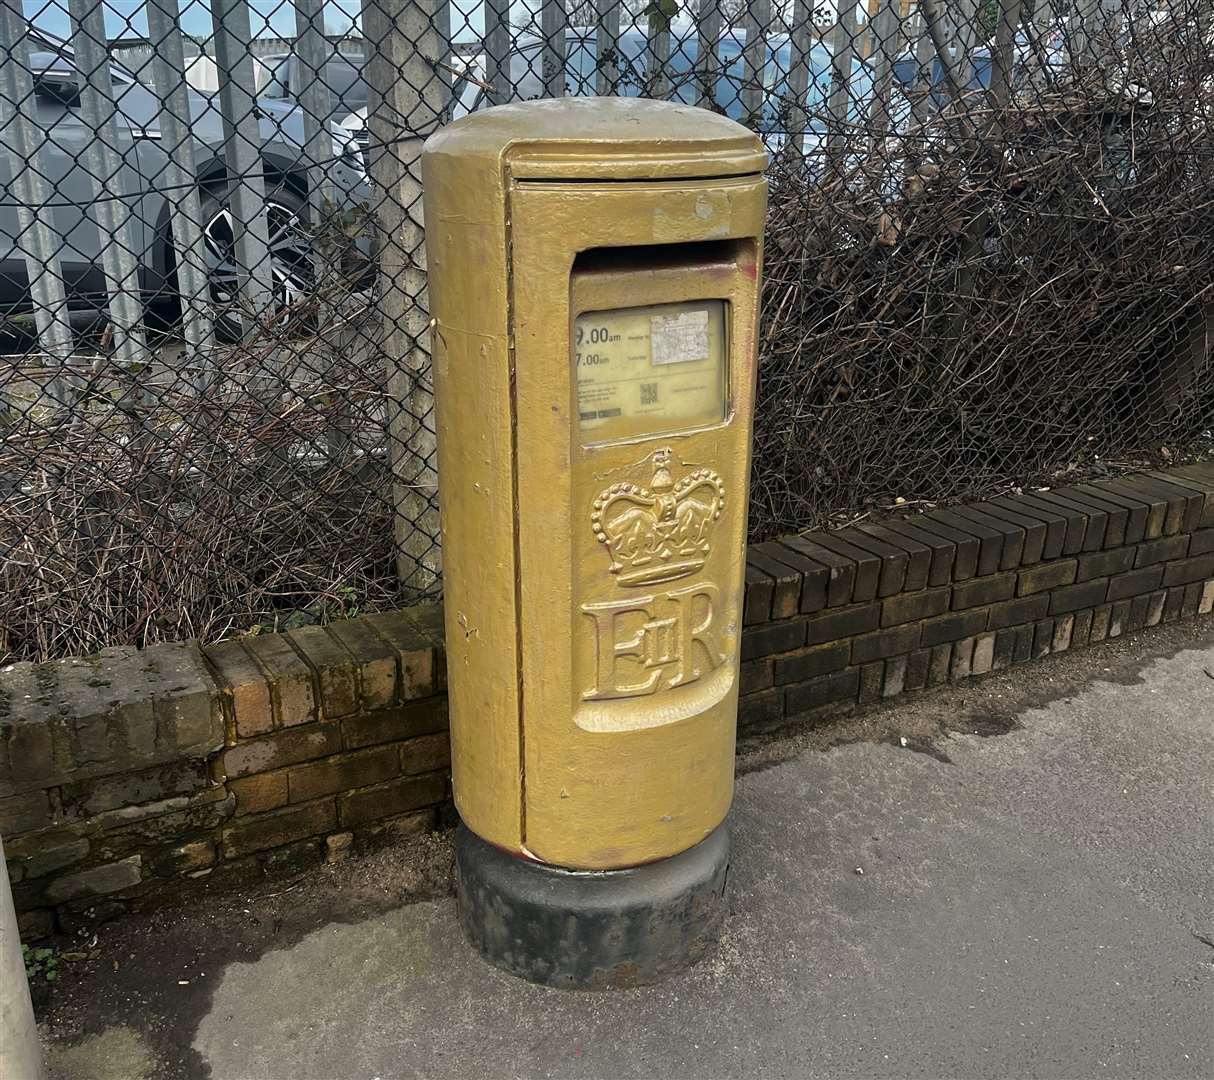 A post box still painted gold in Darenth Road while another in Trevithick Drive has been turned pink and yellow